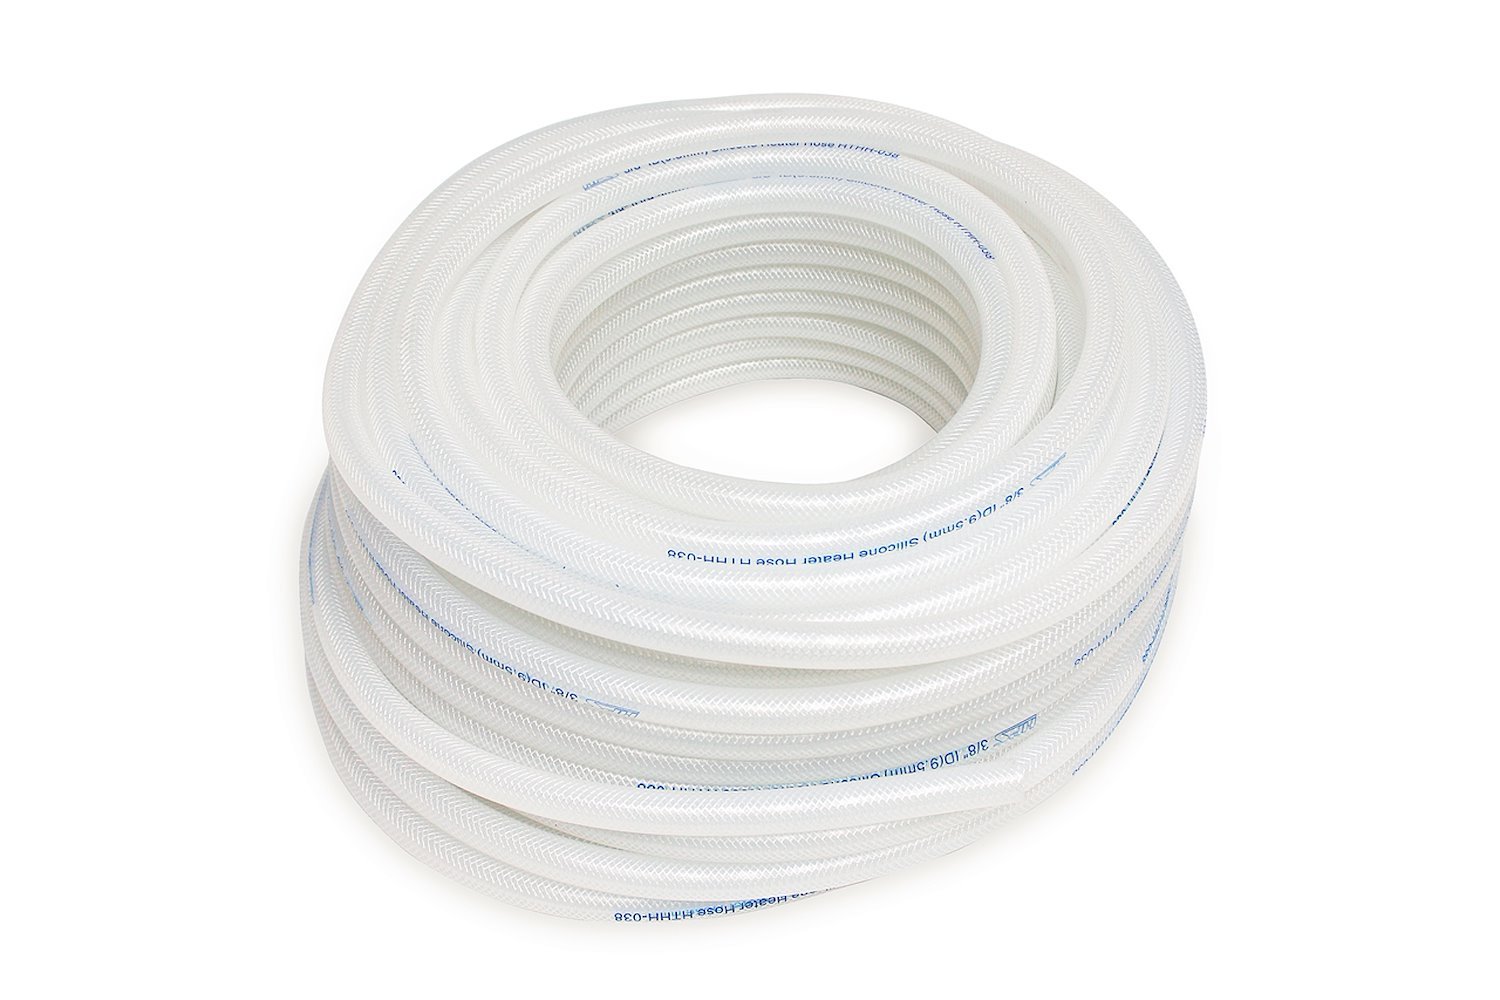 HTHH-025-CLEARx50 Silicone Heater Hose Tubing, High-Temp Reinforced, 1/4 in. ID, 50 ft. Roll, Clear